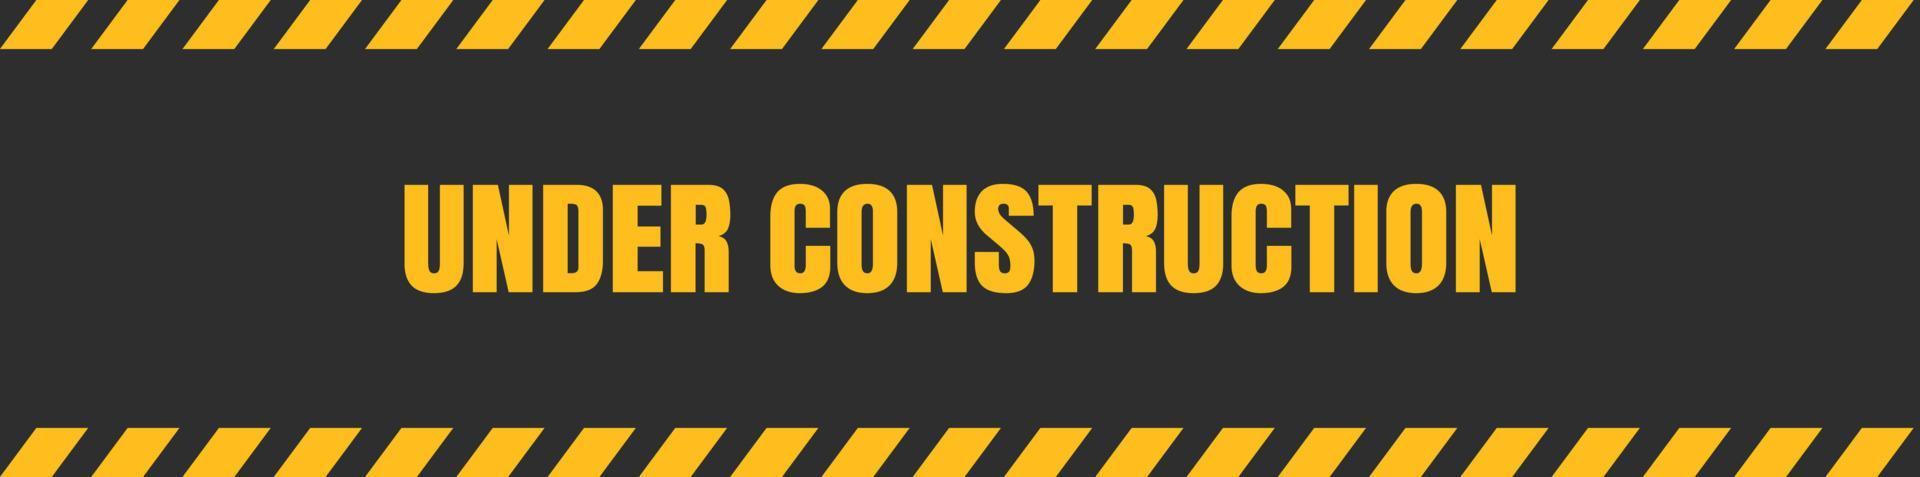 under construction background. under construction sign background with black and yellow stripes. black and yellow stripes warning caution sign. vector